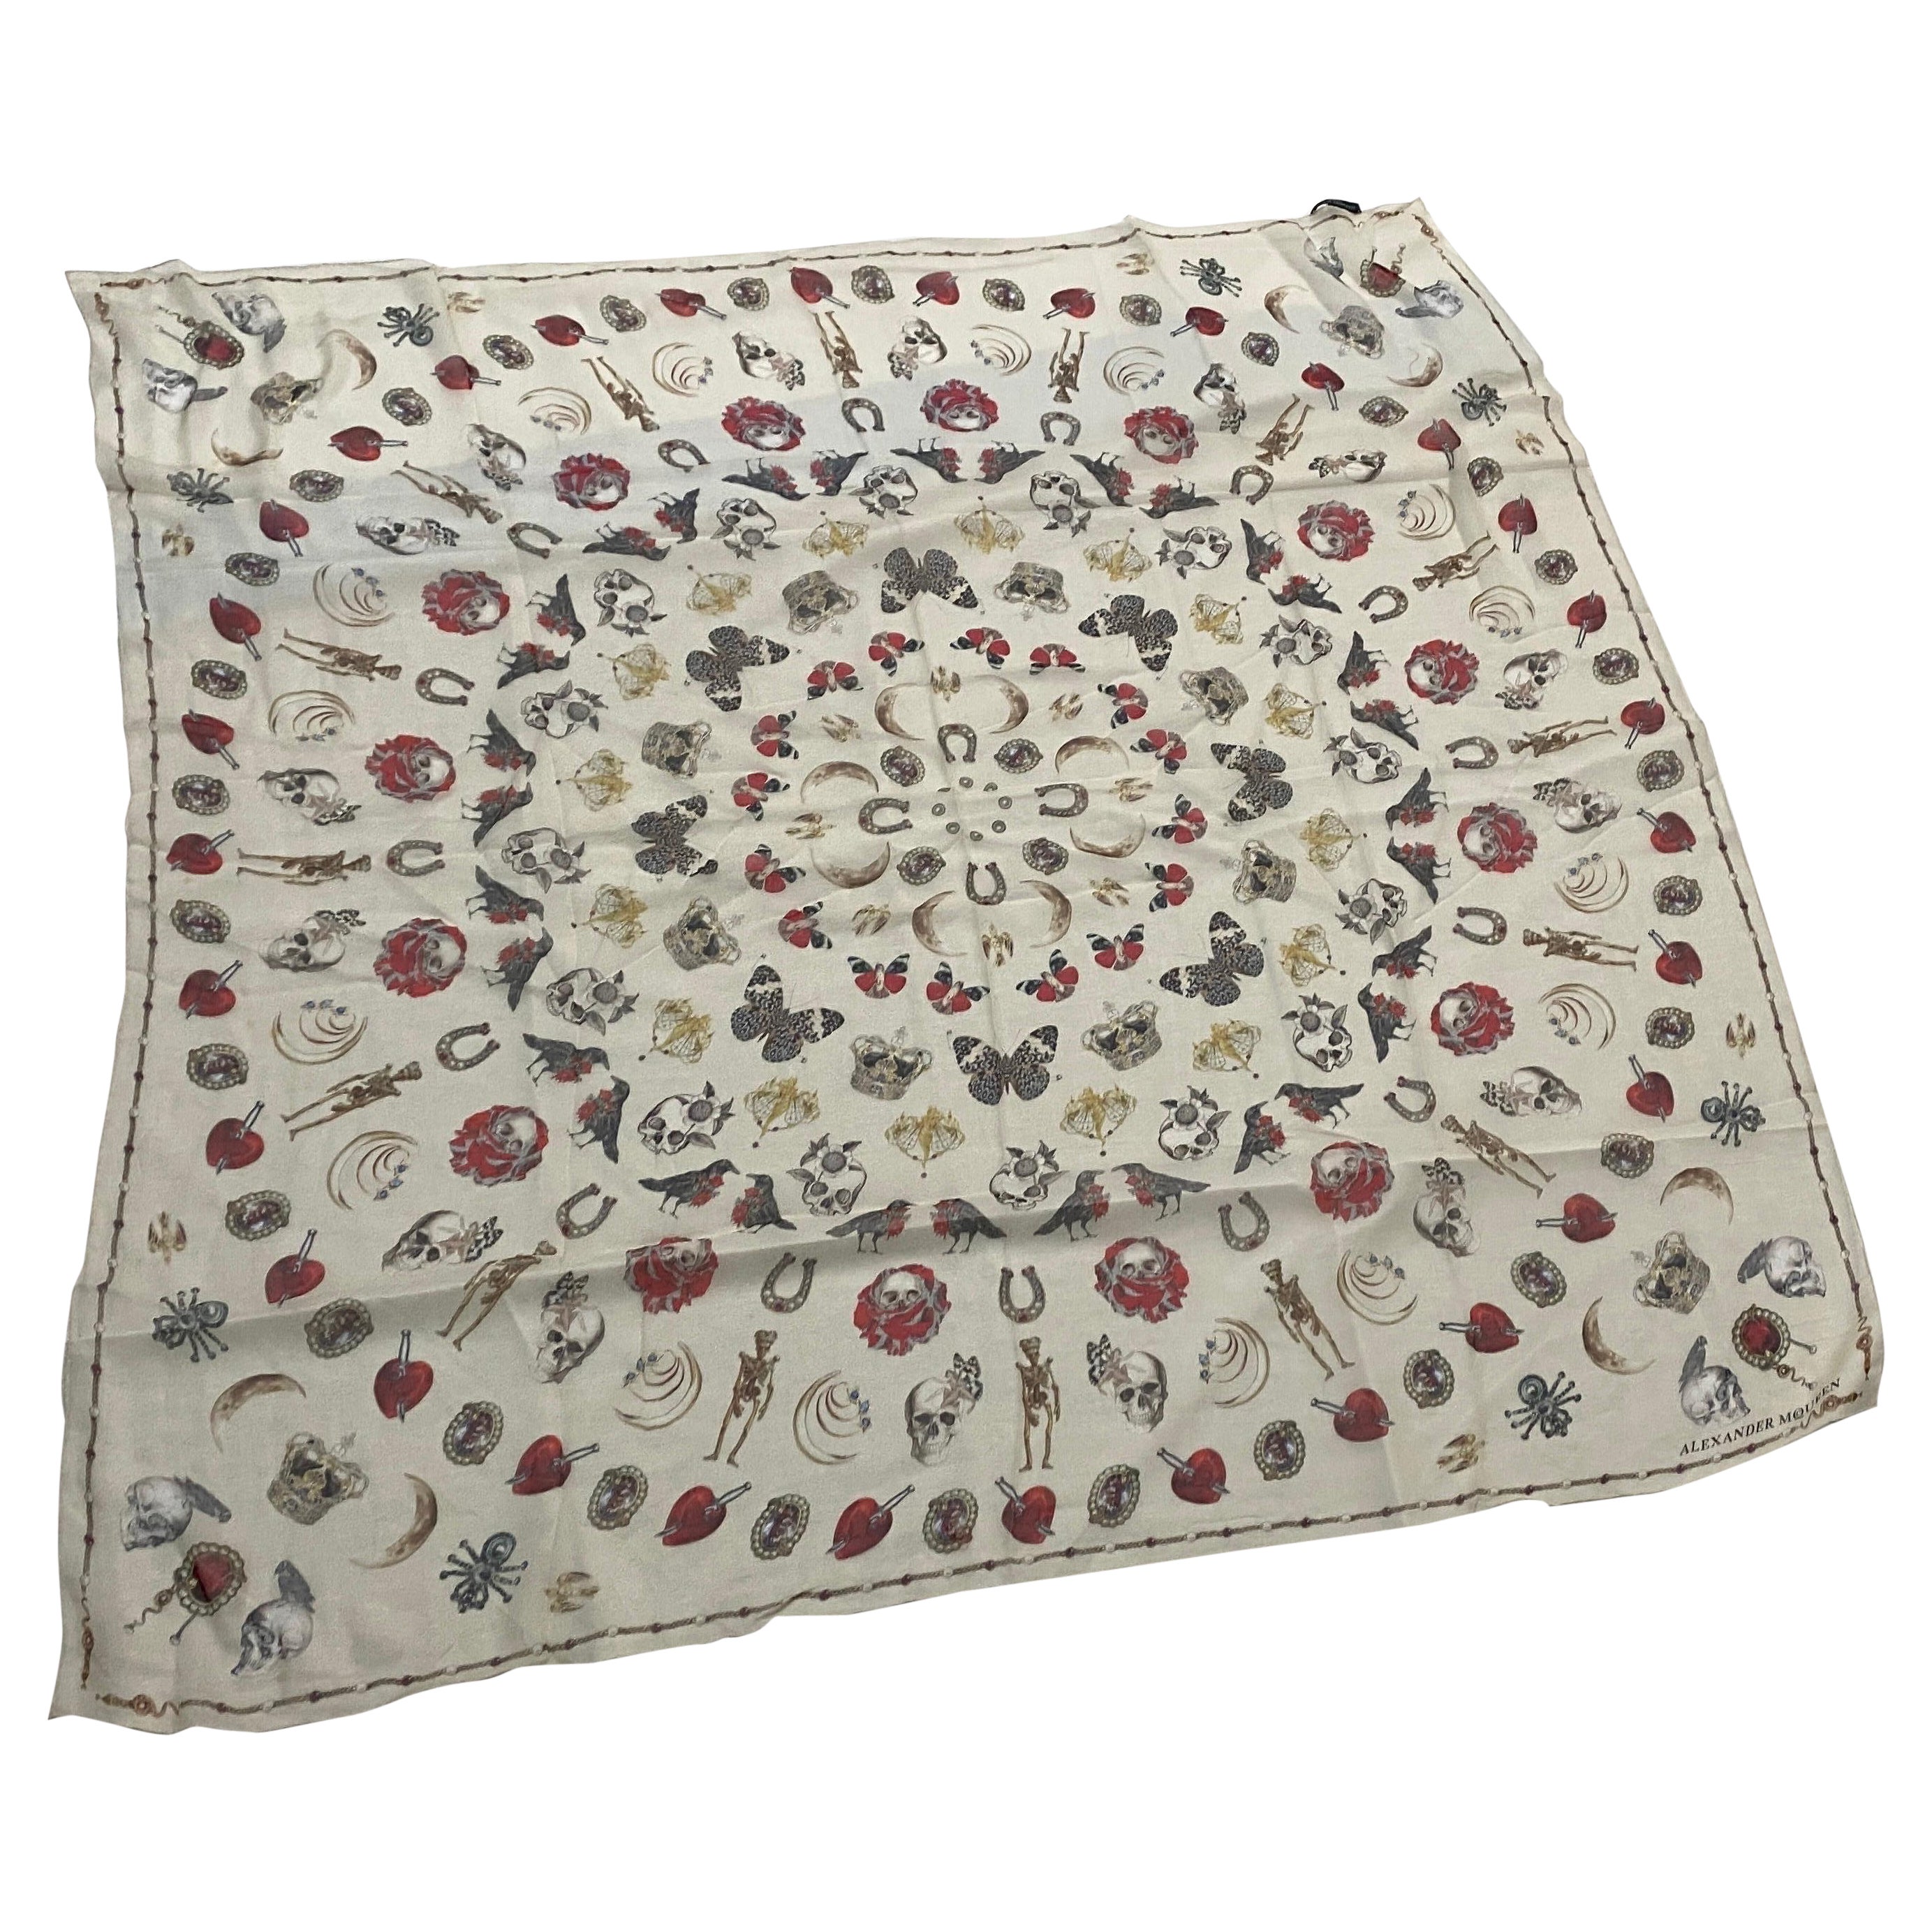 An Iconic Policrome Silk Scarf by Alexander McQueen Manufactured in Italy For Sale